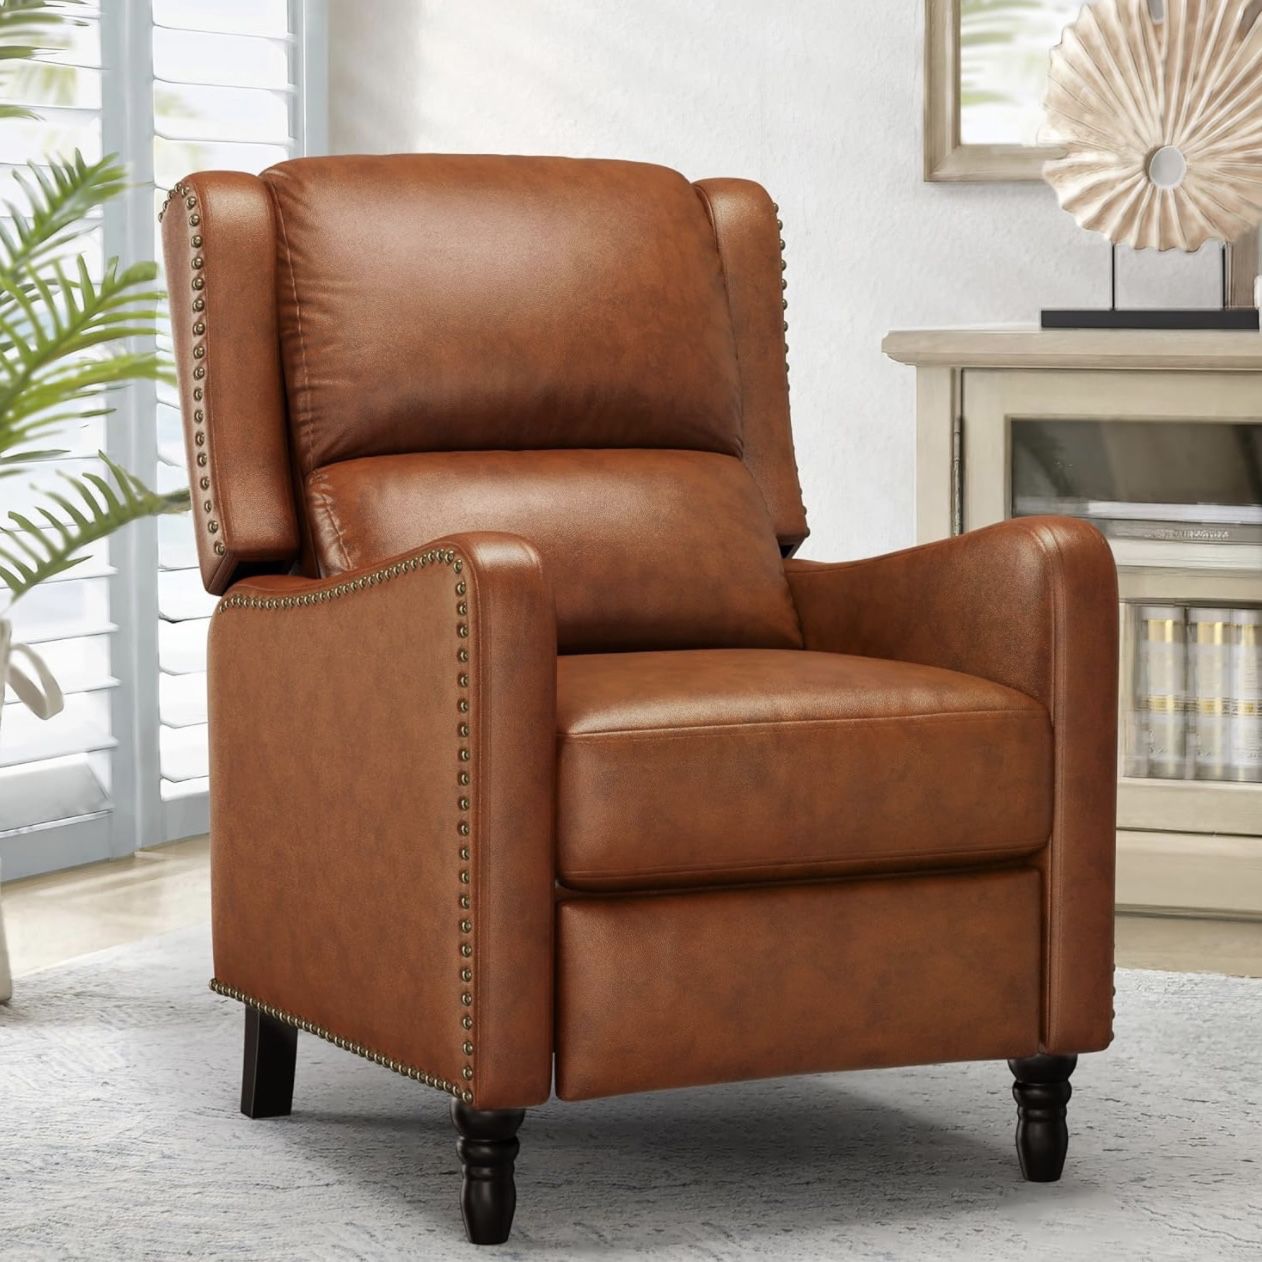 Upholstered Recliner Chair, Leather Push Back Recliner Chairs with Footrest